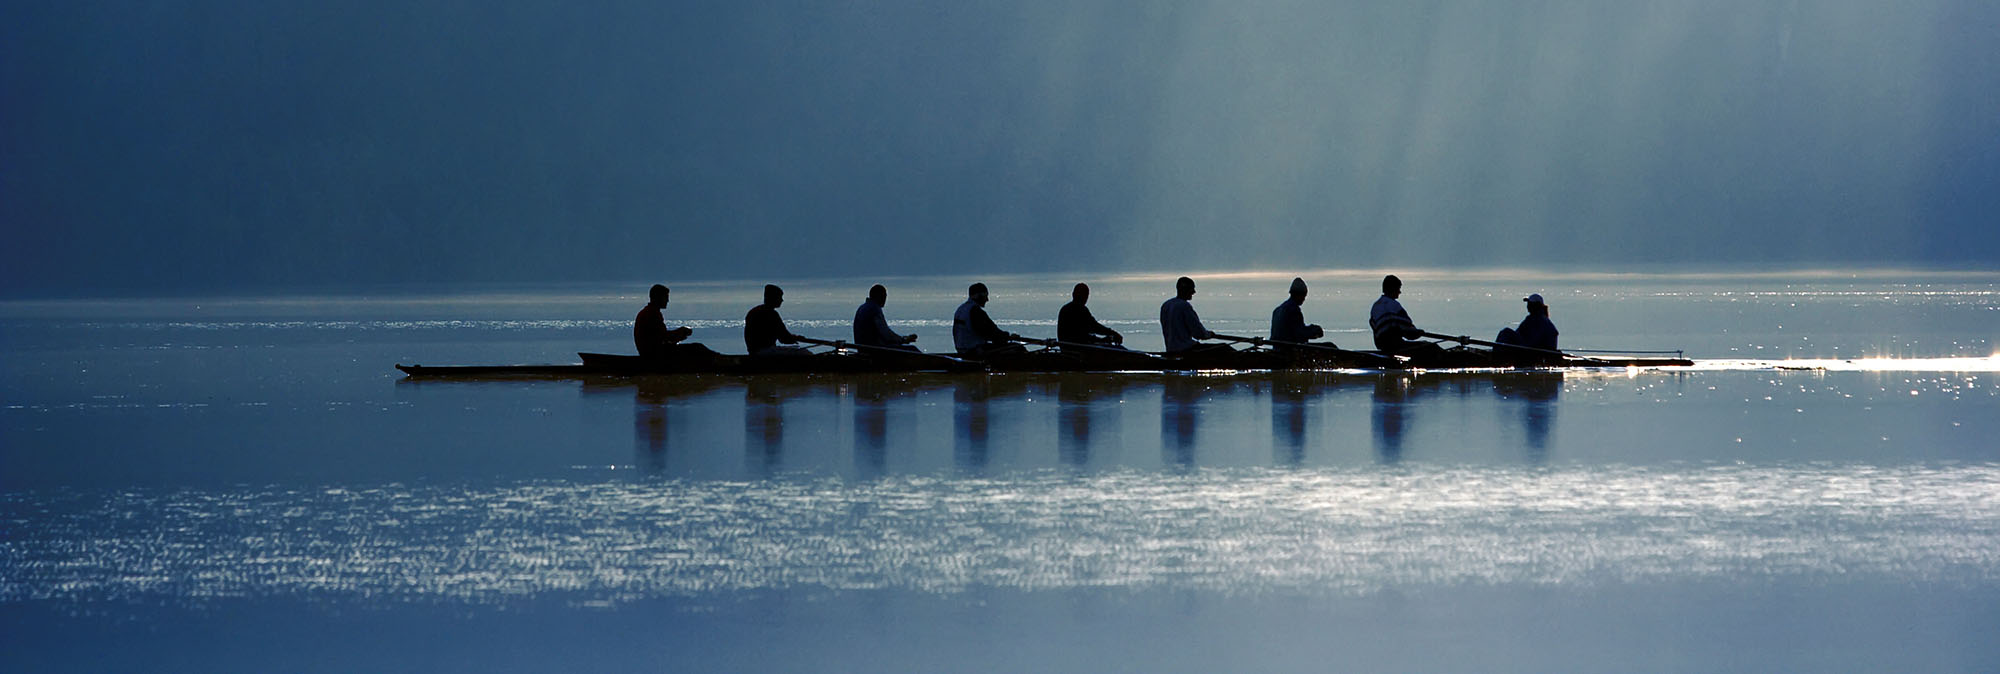 team of people rowing a canoe